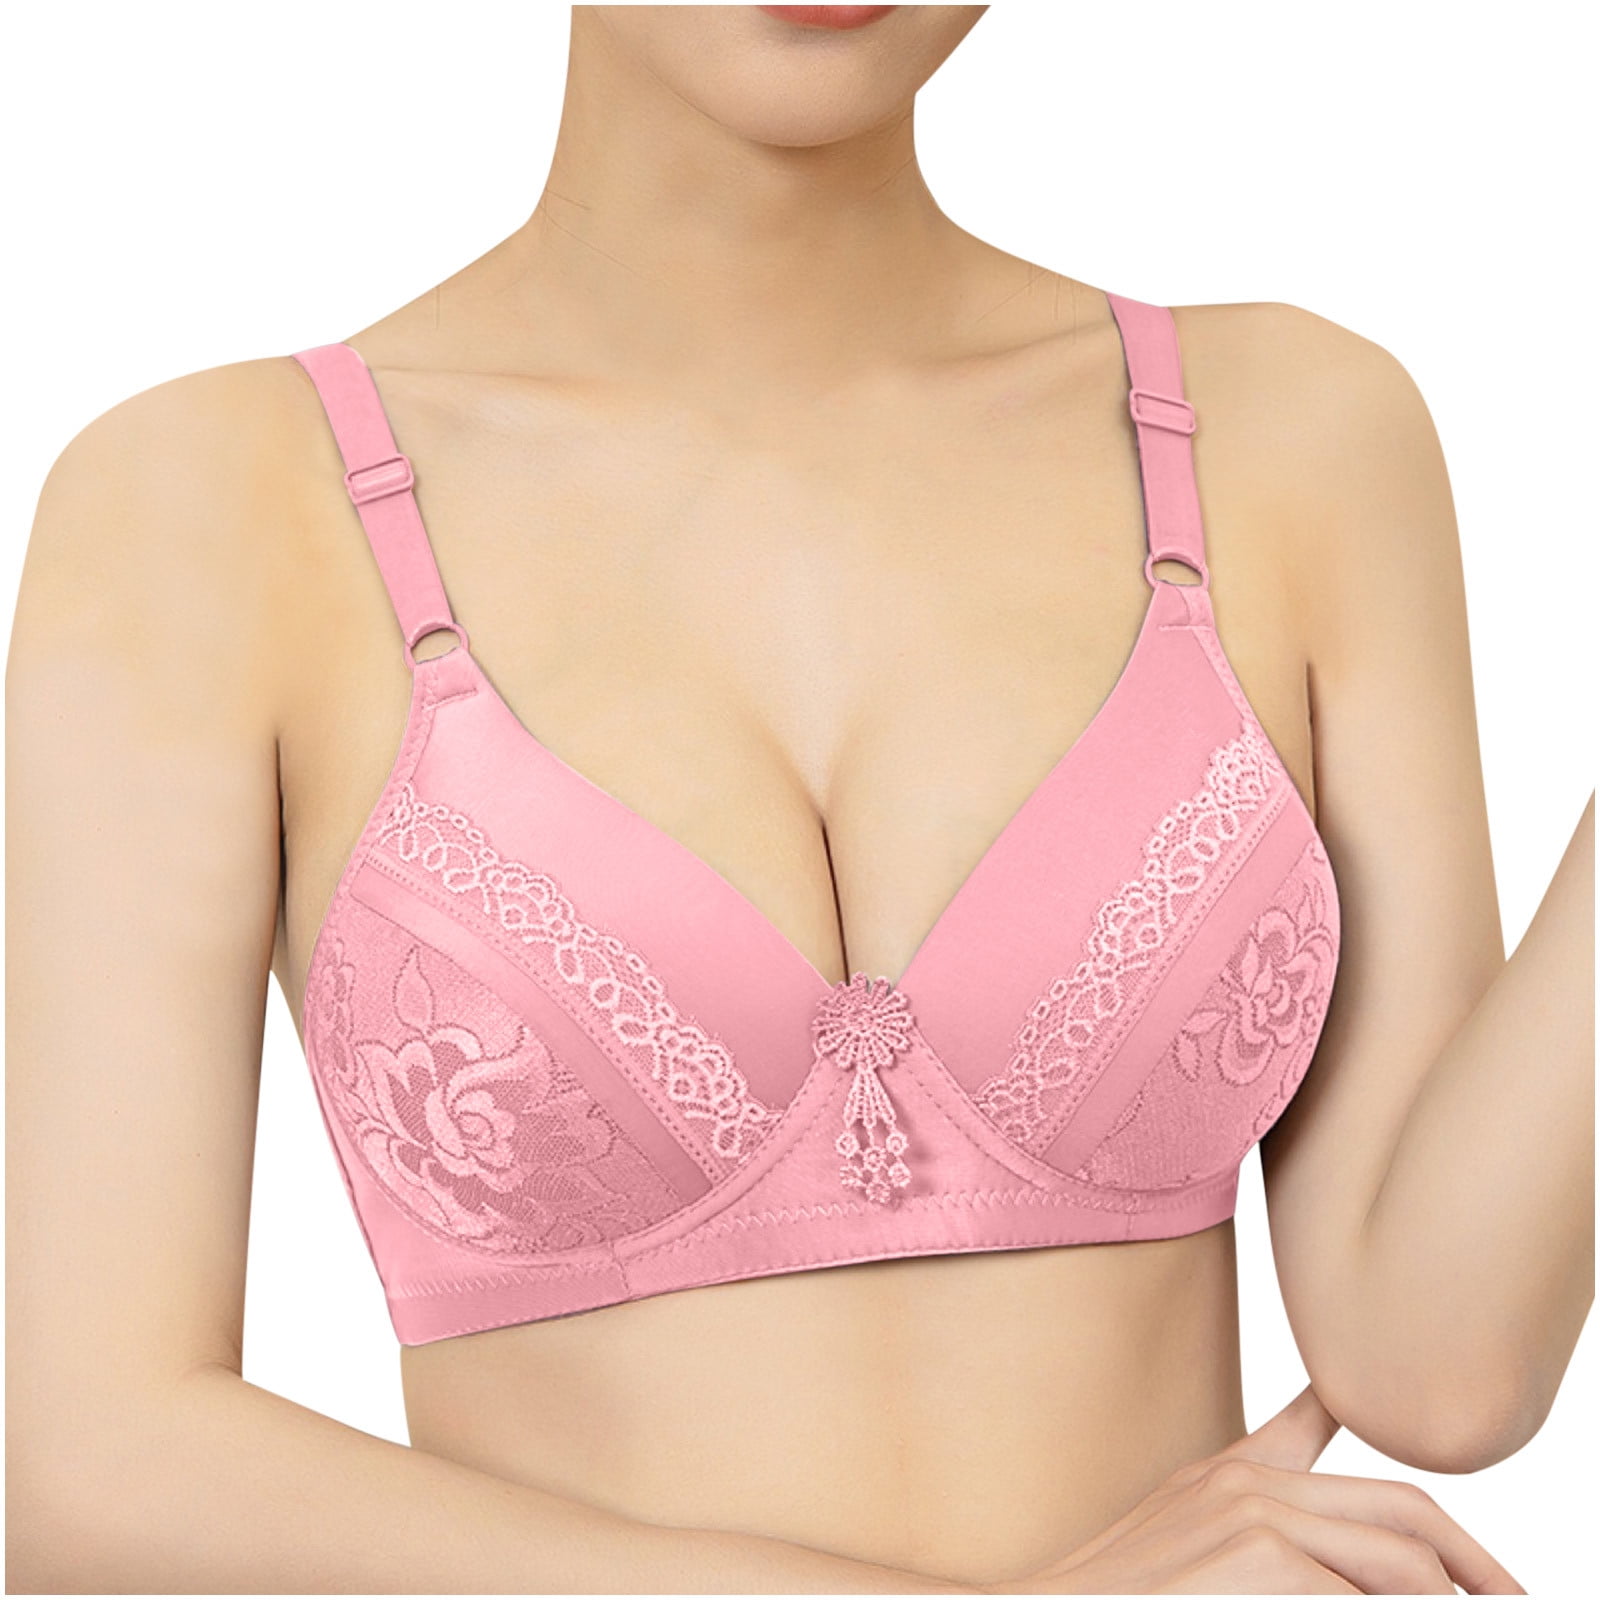 Large Size Rimless Bras for Women's 36-46 B/C Middle Aged Bralette